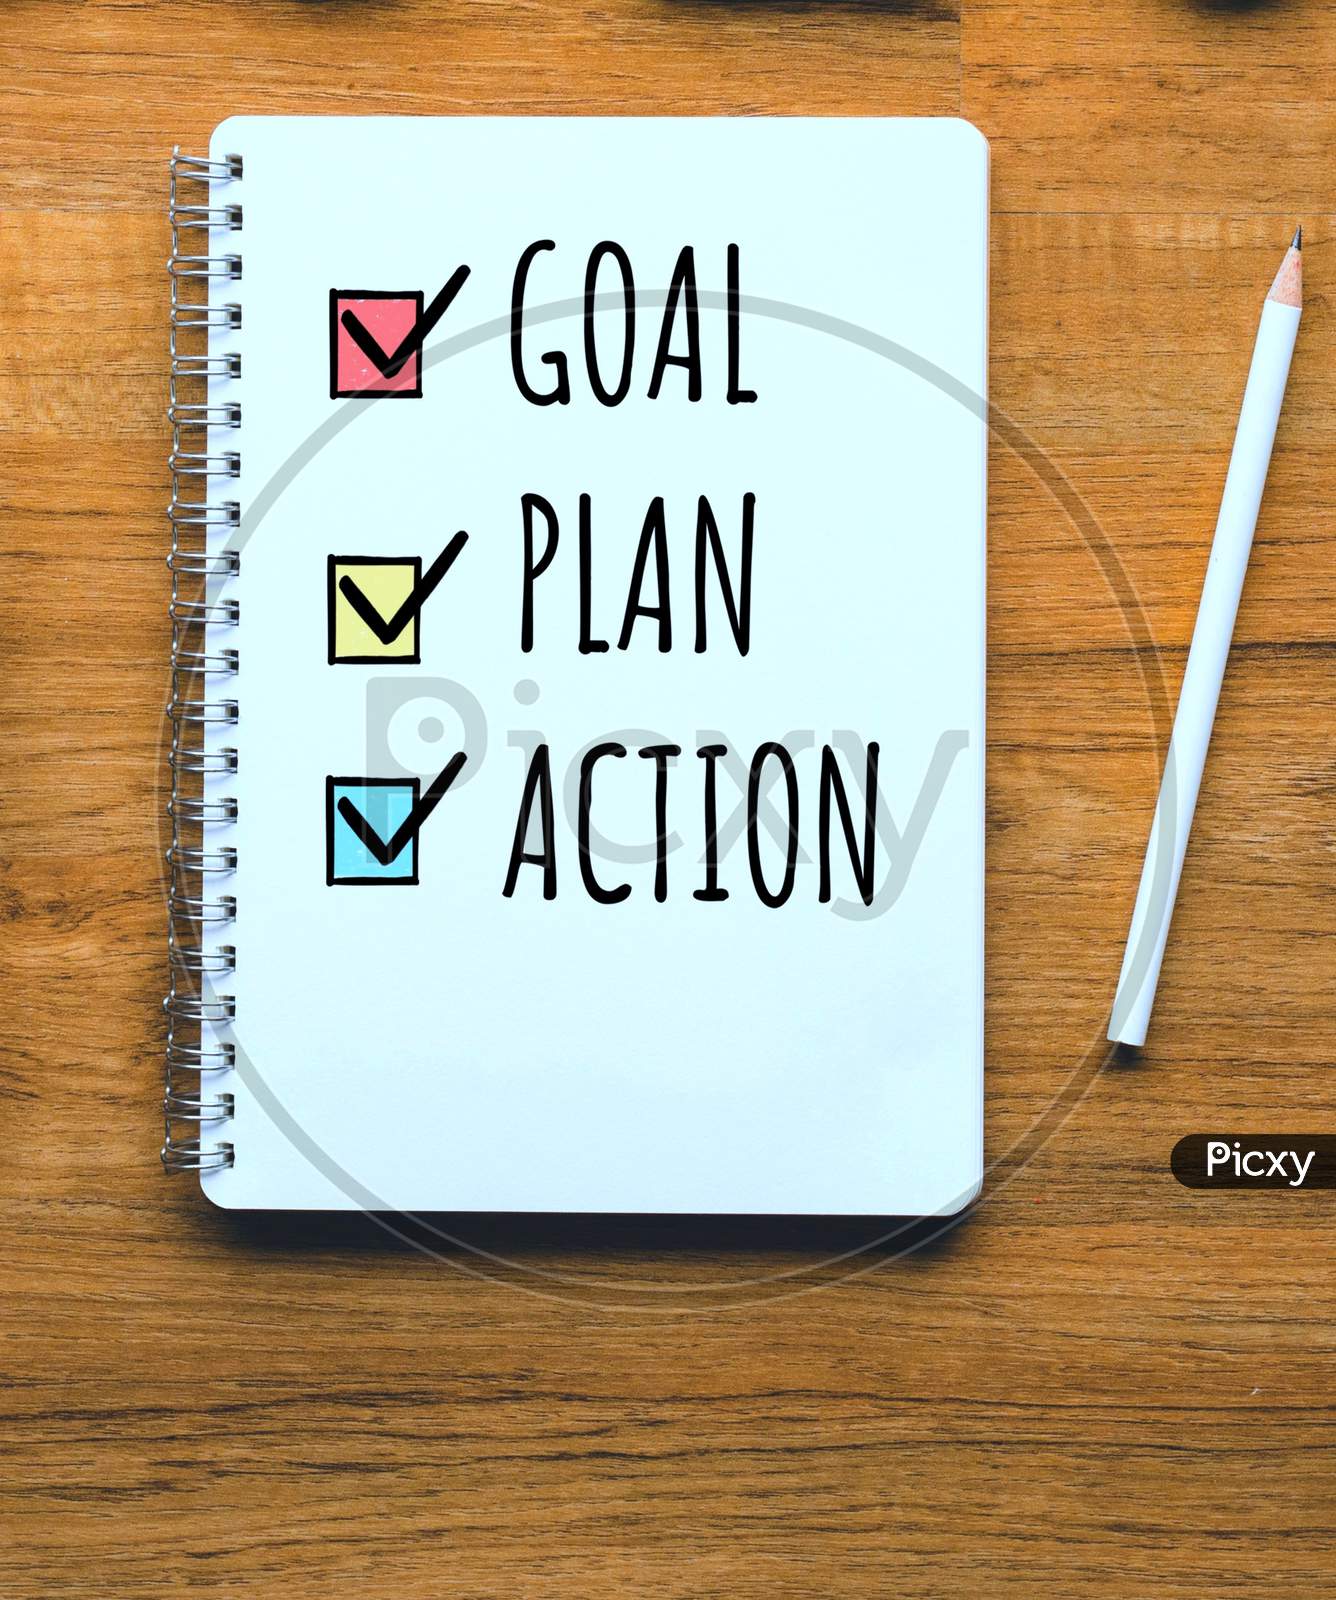 A Picture Of The Beautiful View Of Goal, Plan, Action